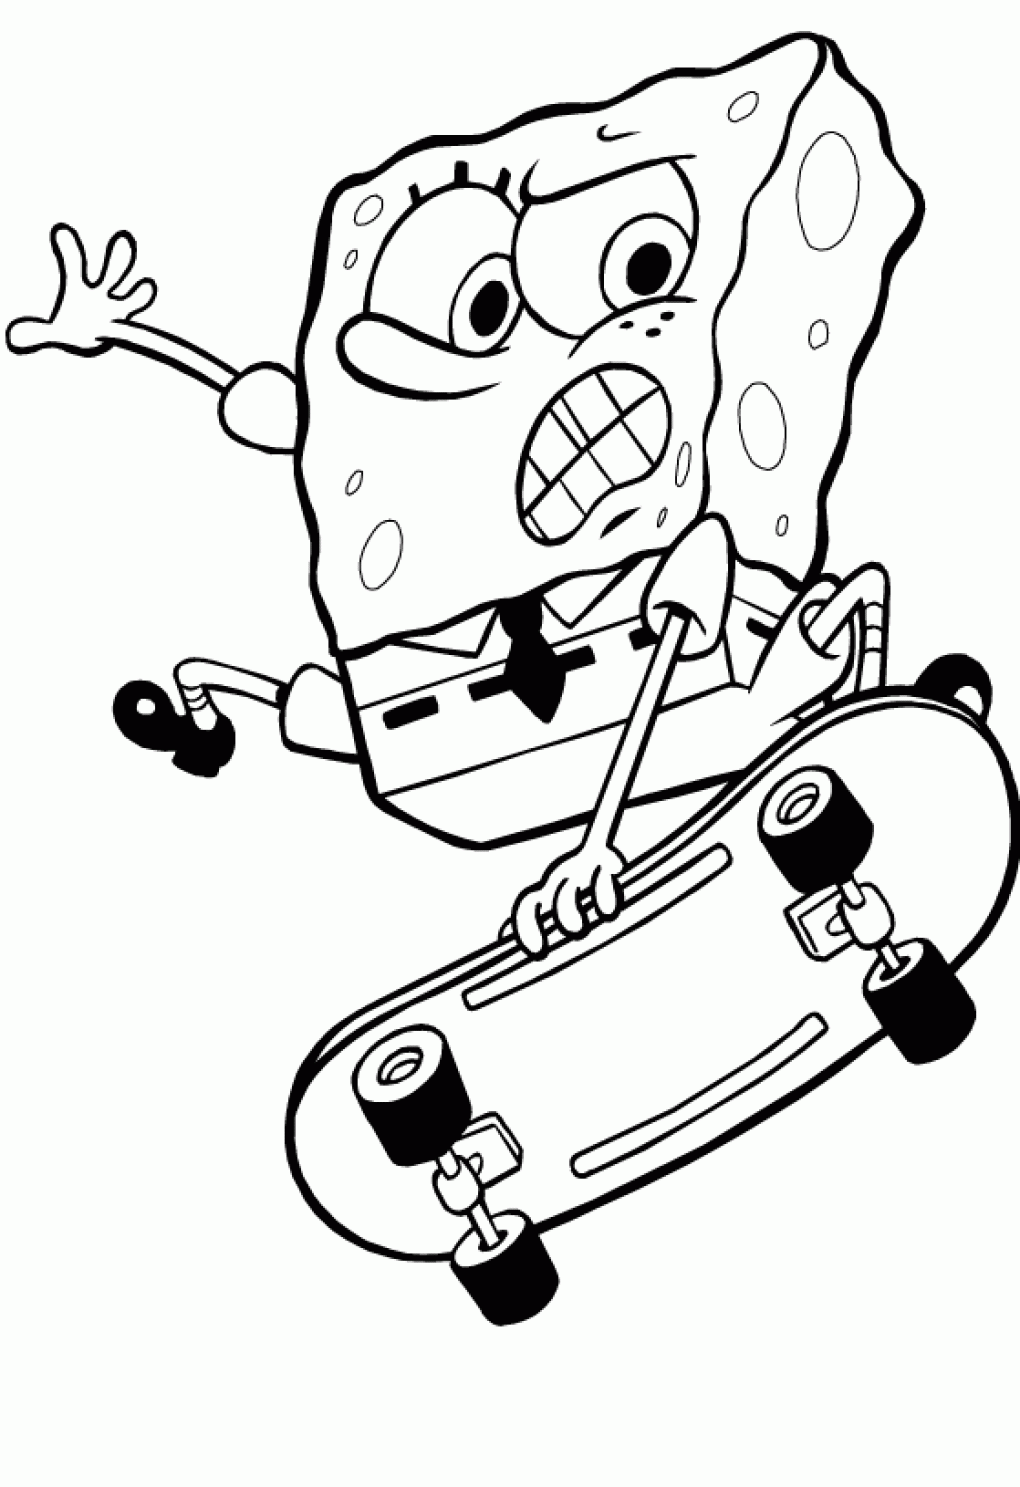 Bob Squarepants Coloring Pages To Print - Coloring Pages For All Ages